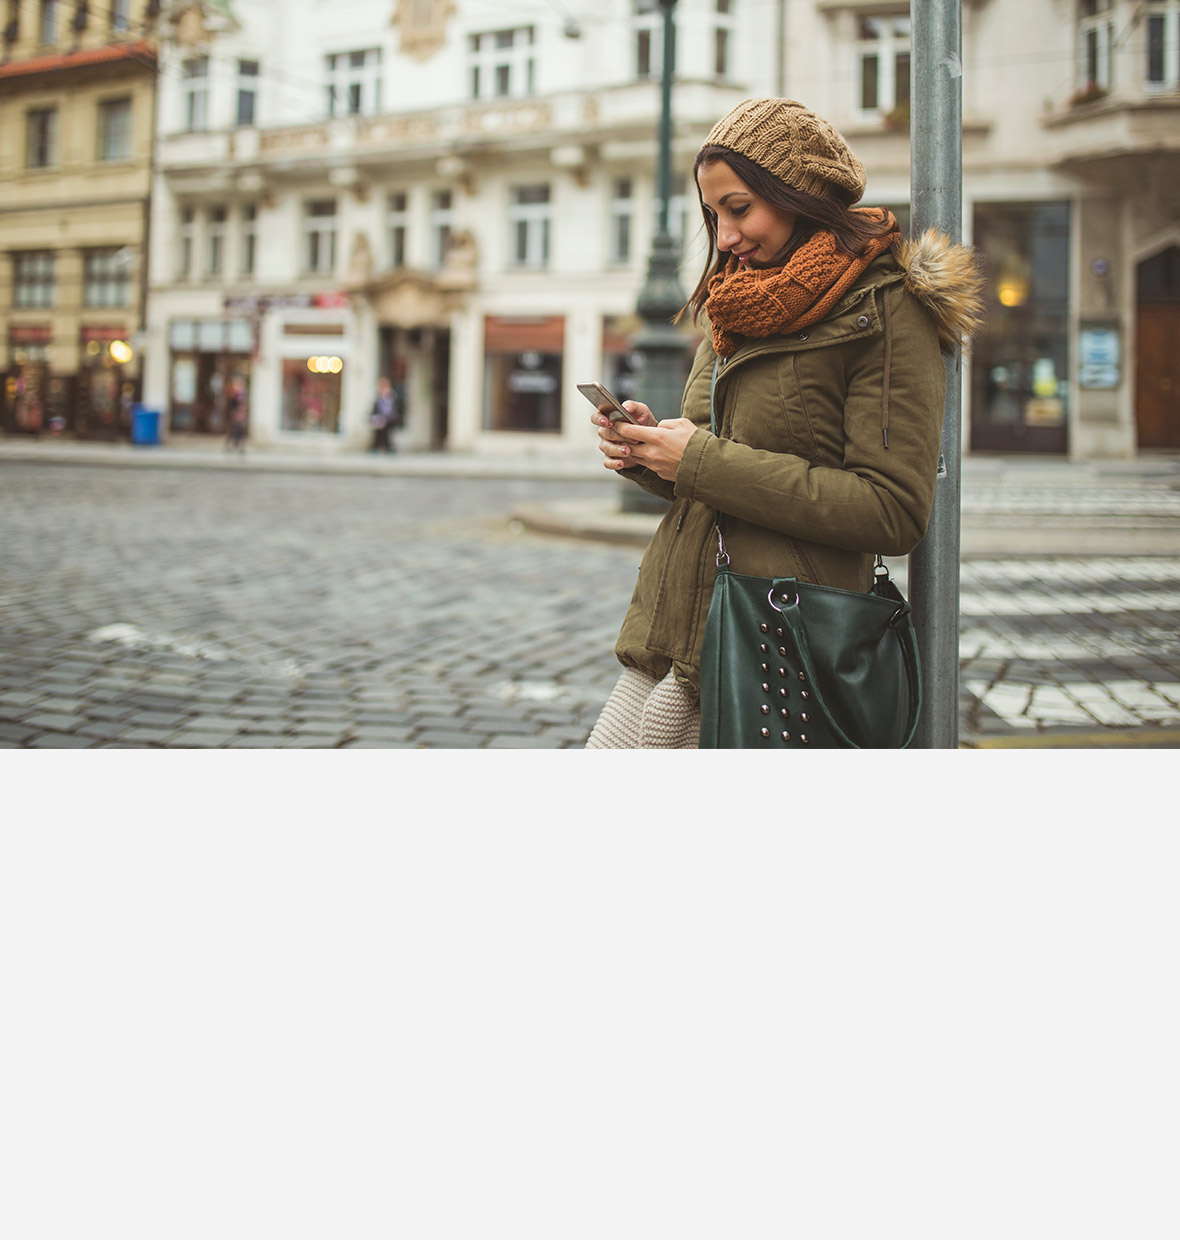 Girl travelling and looking at her phone